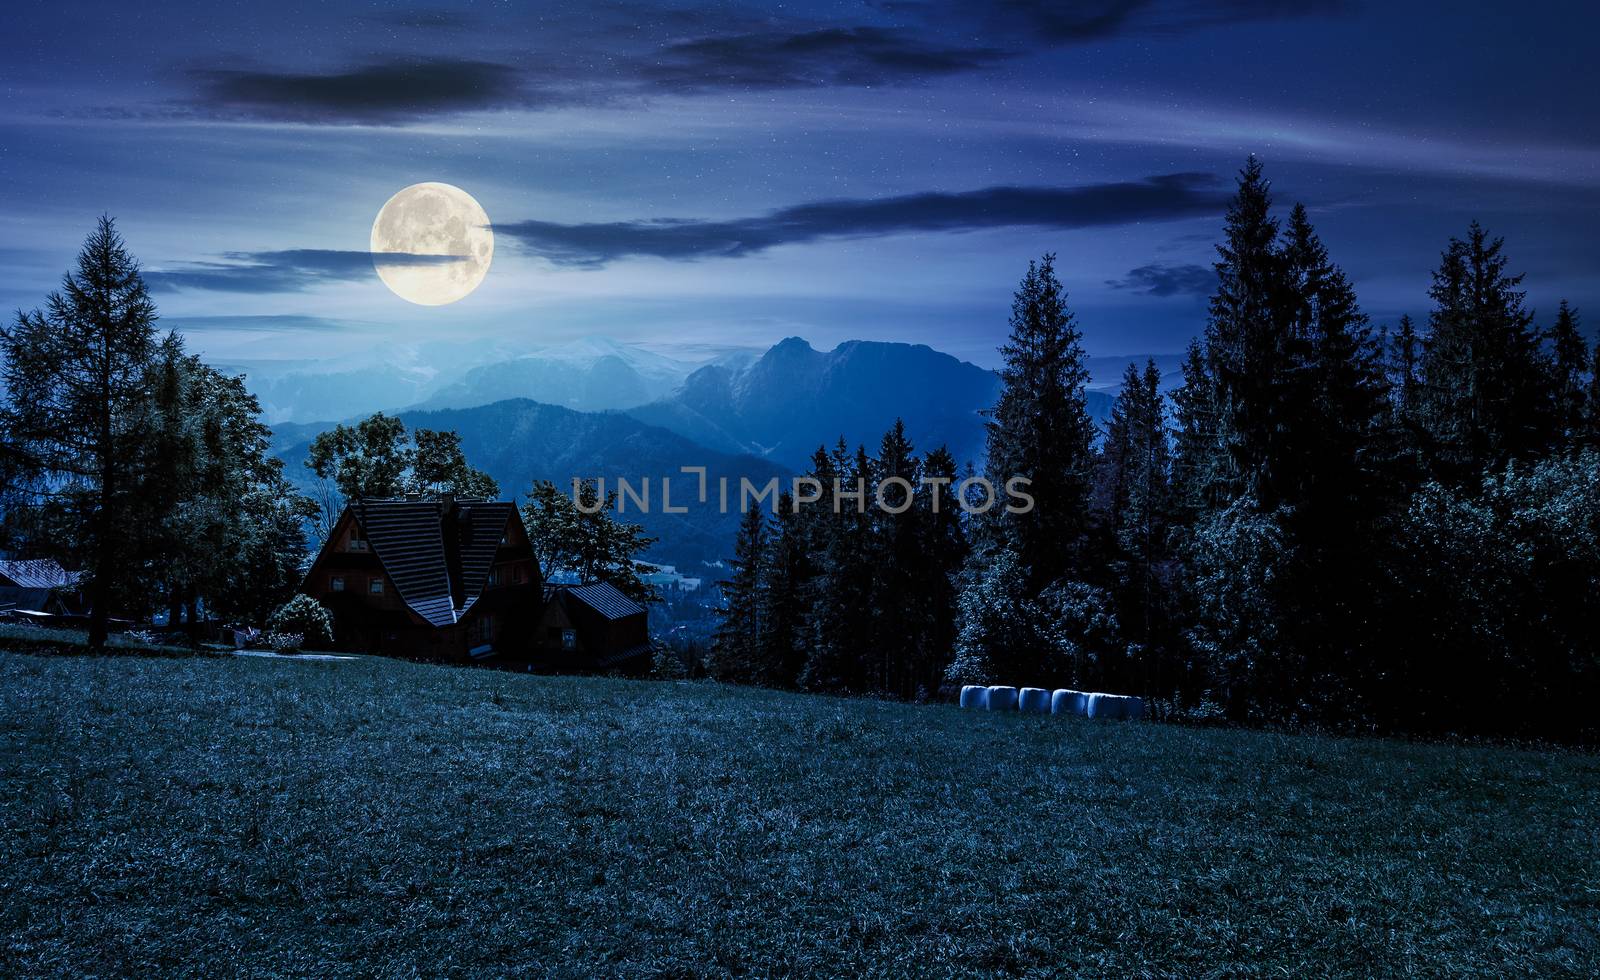 beautiful landscape of Tatra Mountains at night in full moon light. location Zakopane village, Poland. lovely scenery with forest on a grassy meadow and a ridge under the gorgeous sky in the distance